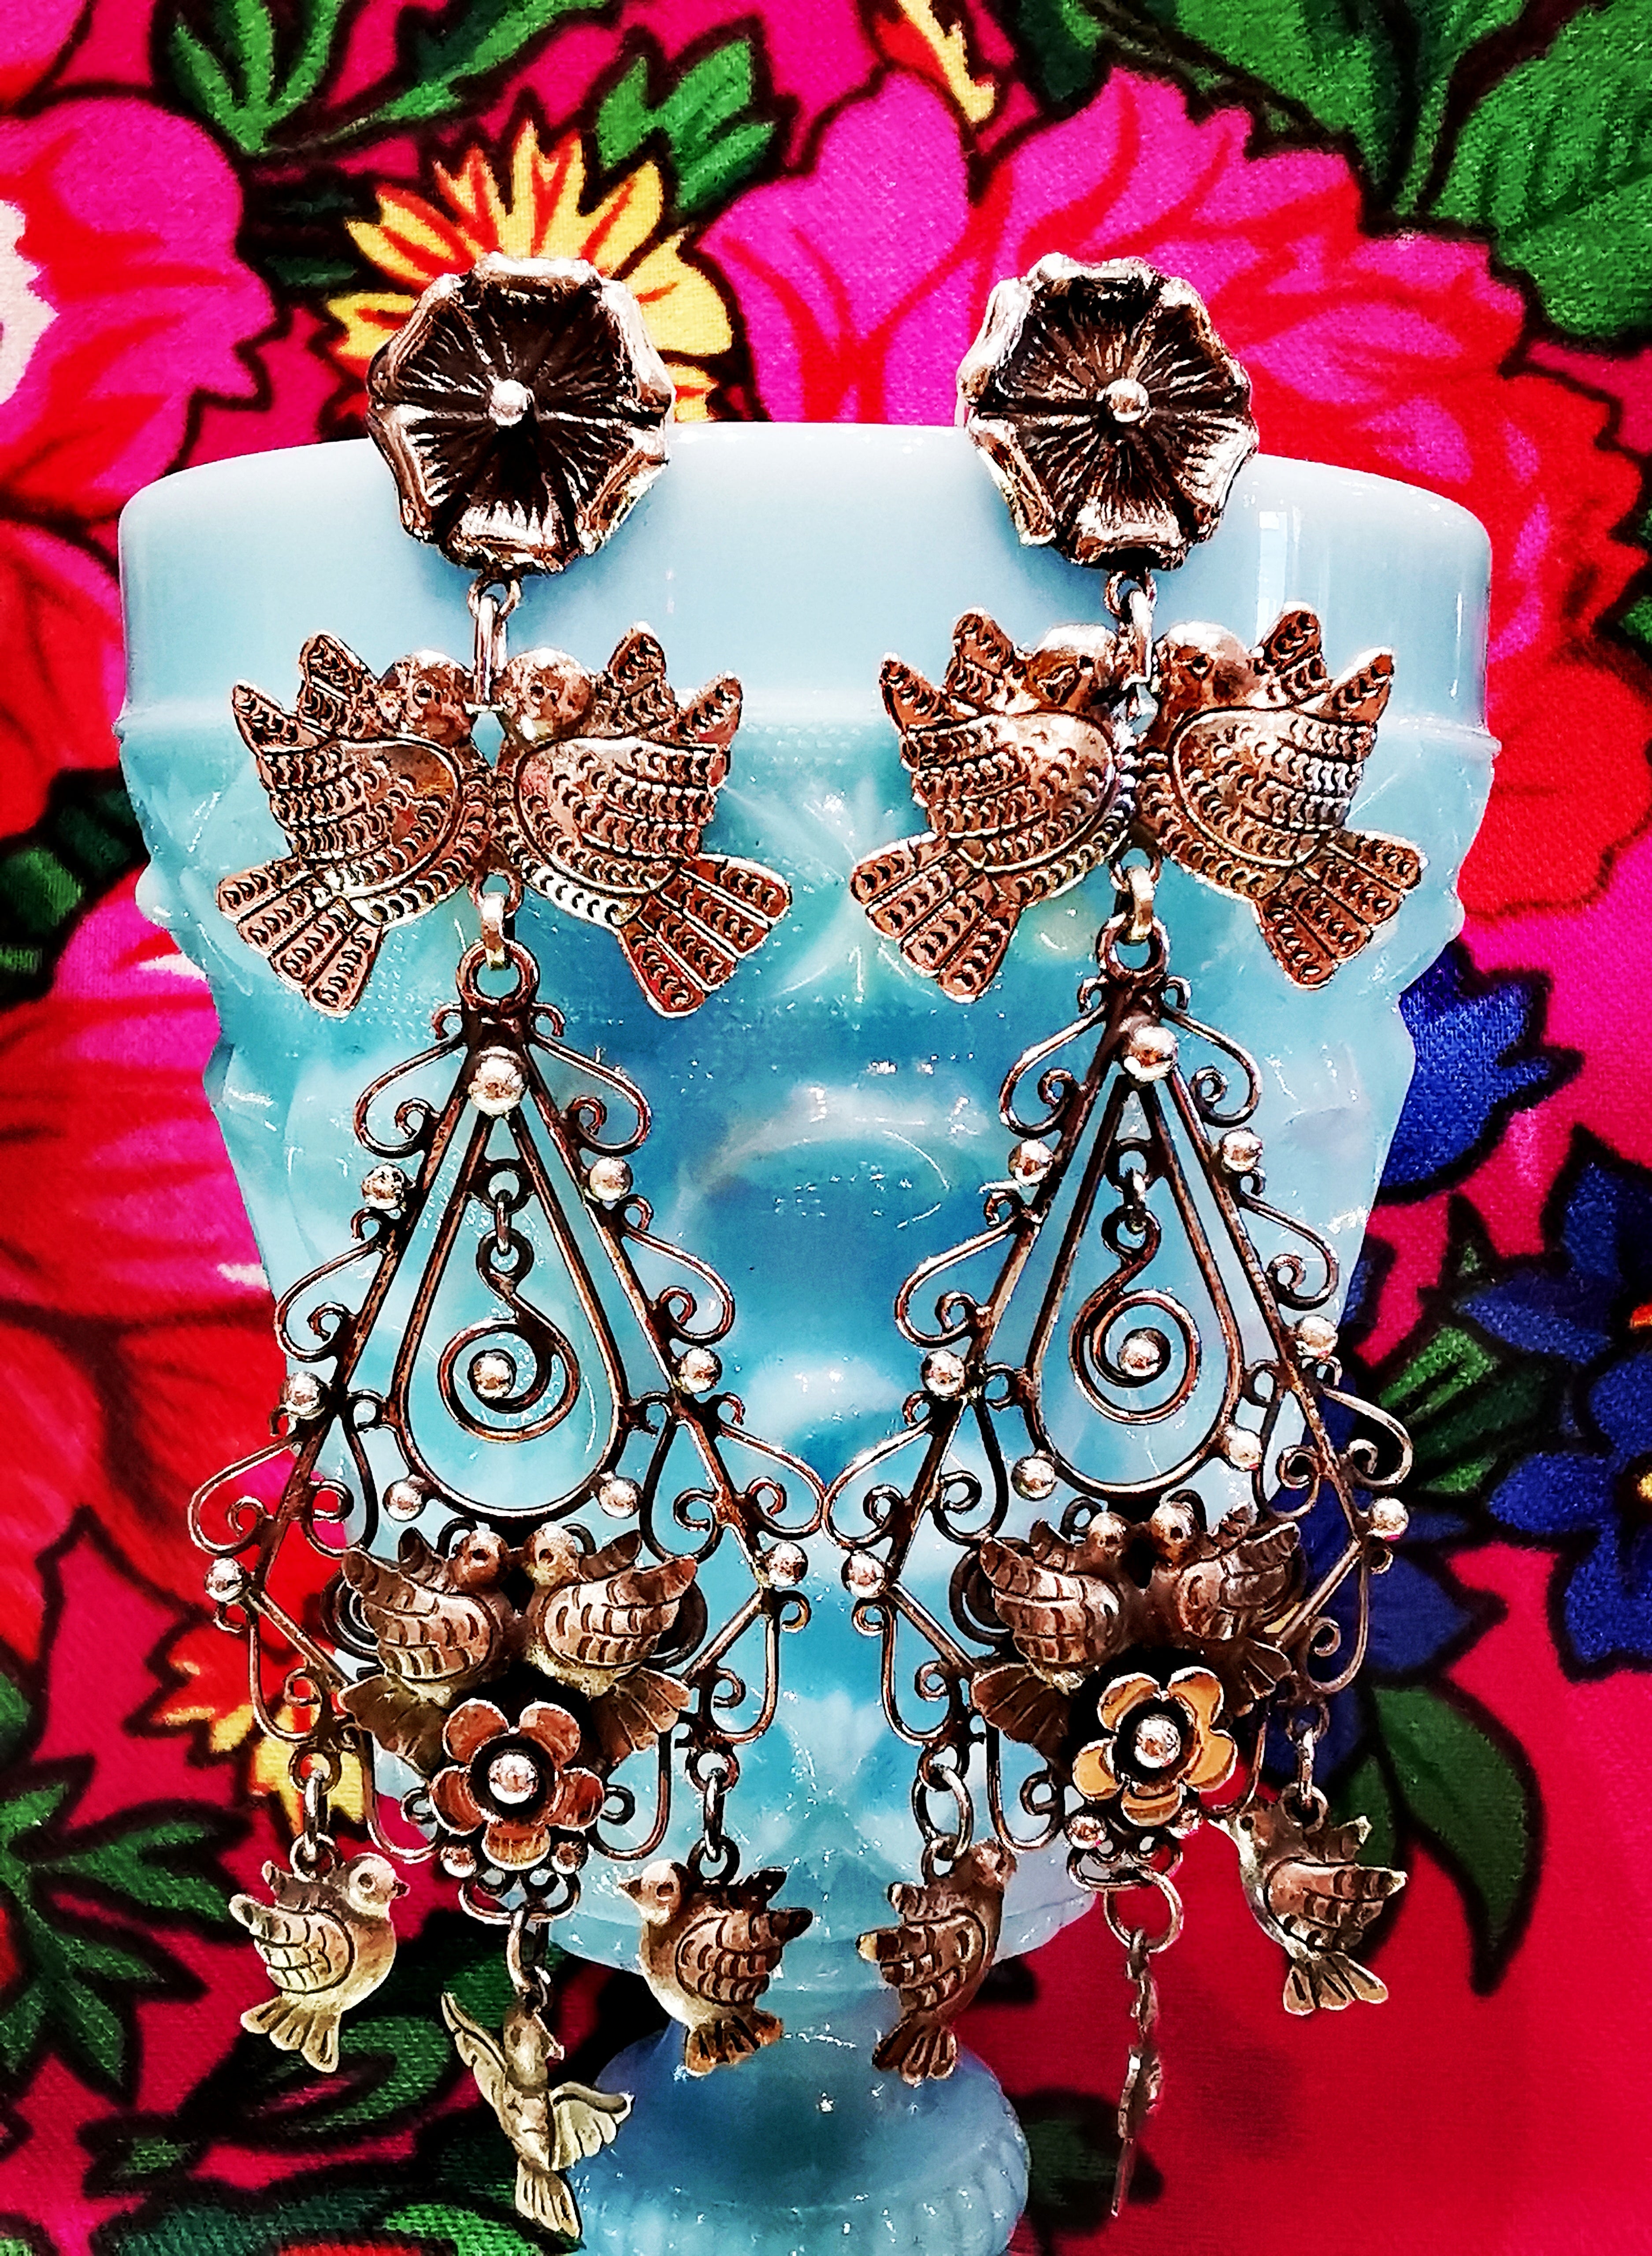 Gorgeous huge Mexican filigree silver earrings with lovebirds and flowers for eternal devotion, a traditional Oaxaca design, all hand made in Mexico

925 sterling silver

9cm x 3cm

